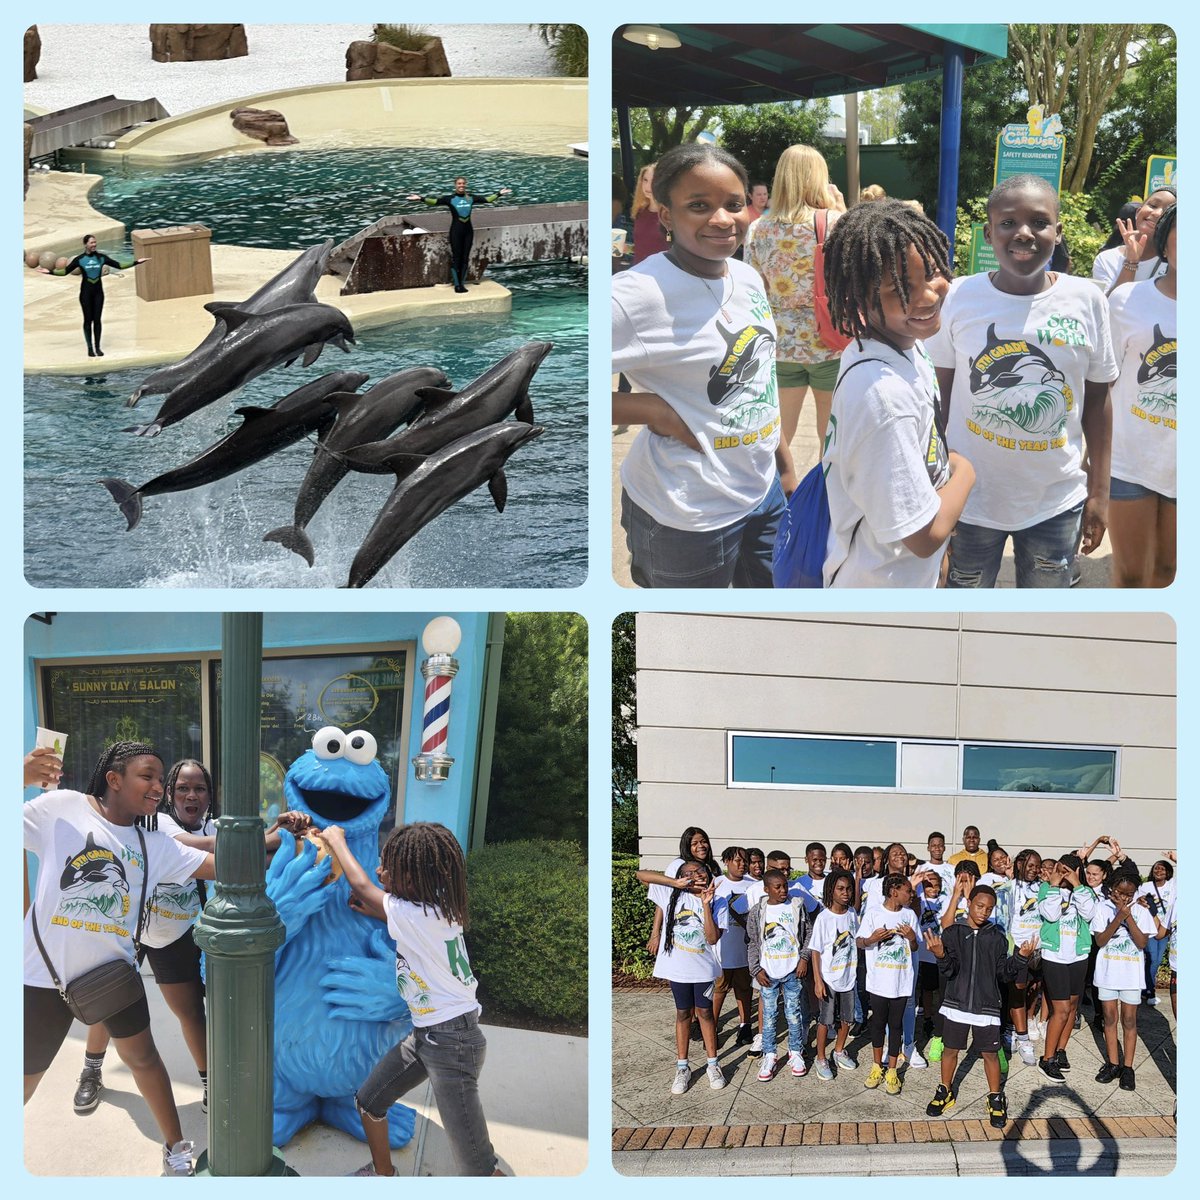 Our 5th grade scholars journeyed to @SeaWorld to kick off our 5th grade festivities. Making memories that will last a lifetime. @RPEMuseummagnet @PrincipalDarby1 @BcpsCentral_ #endofyeartrip #lastdaysofelementaryschool